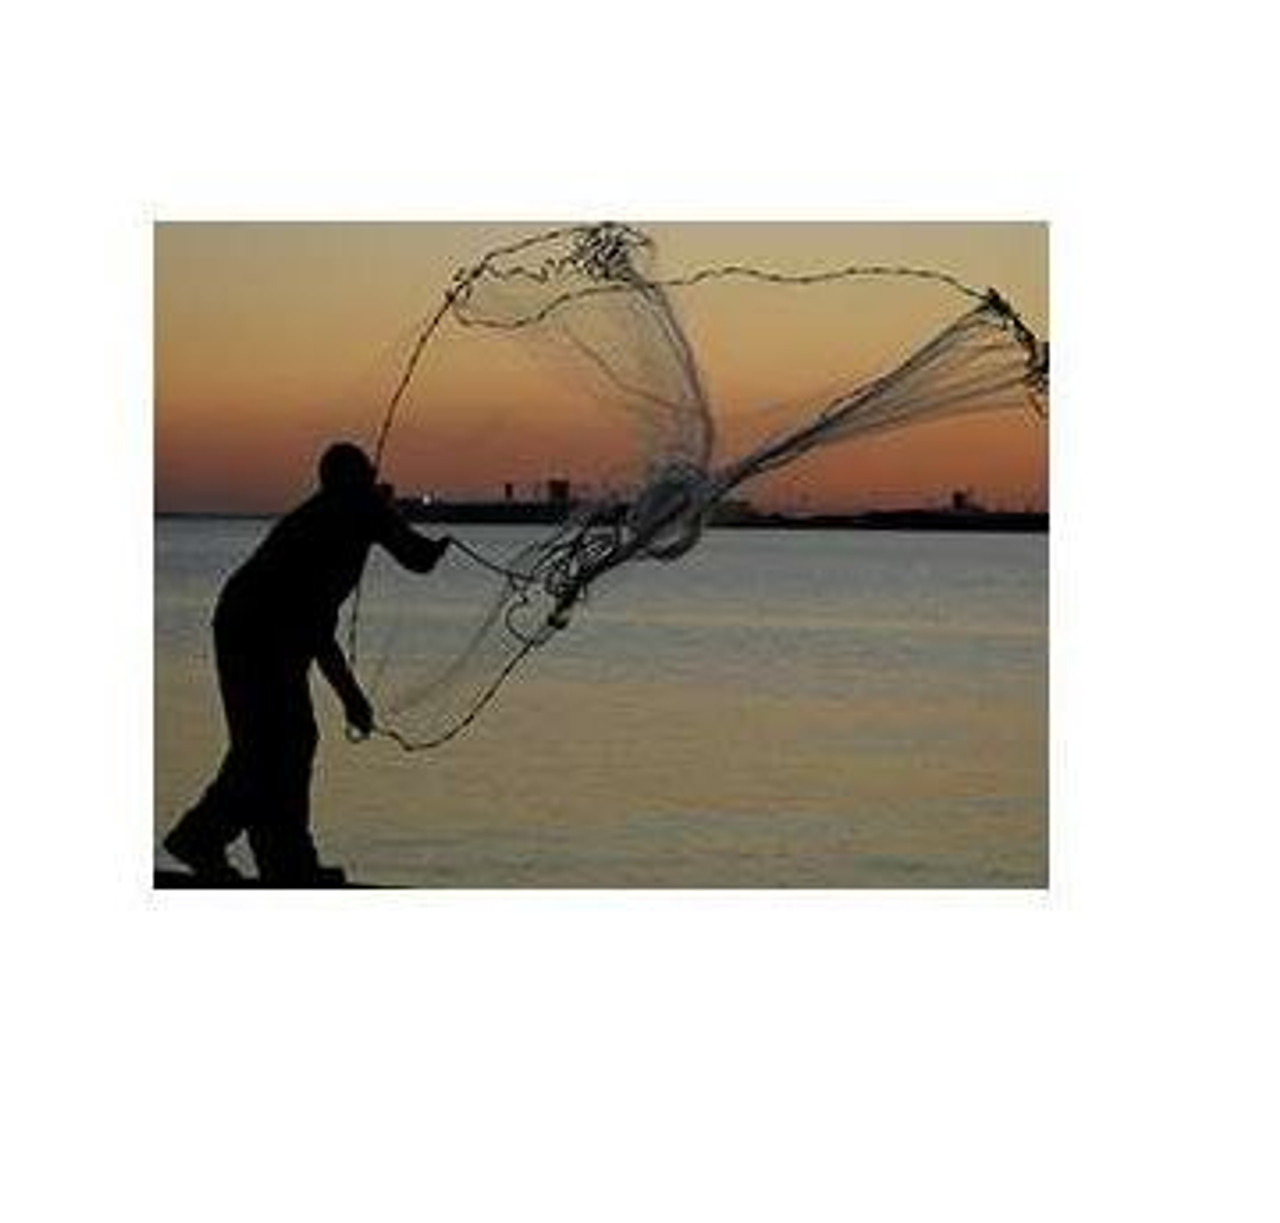 https://cdn11.bigcommerce.com/s-s7ib93jl4n/images/stencil/1280x1280/products/27629/16544/betts-tackle-5ft-3-8inch-cast-net-2__09563.1578518943.JPG?c=2?imbypass=on